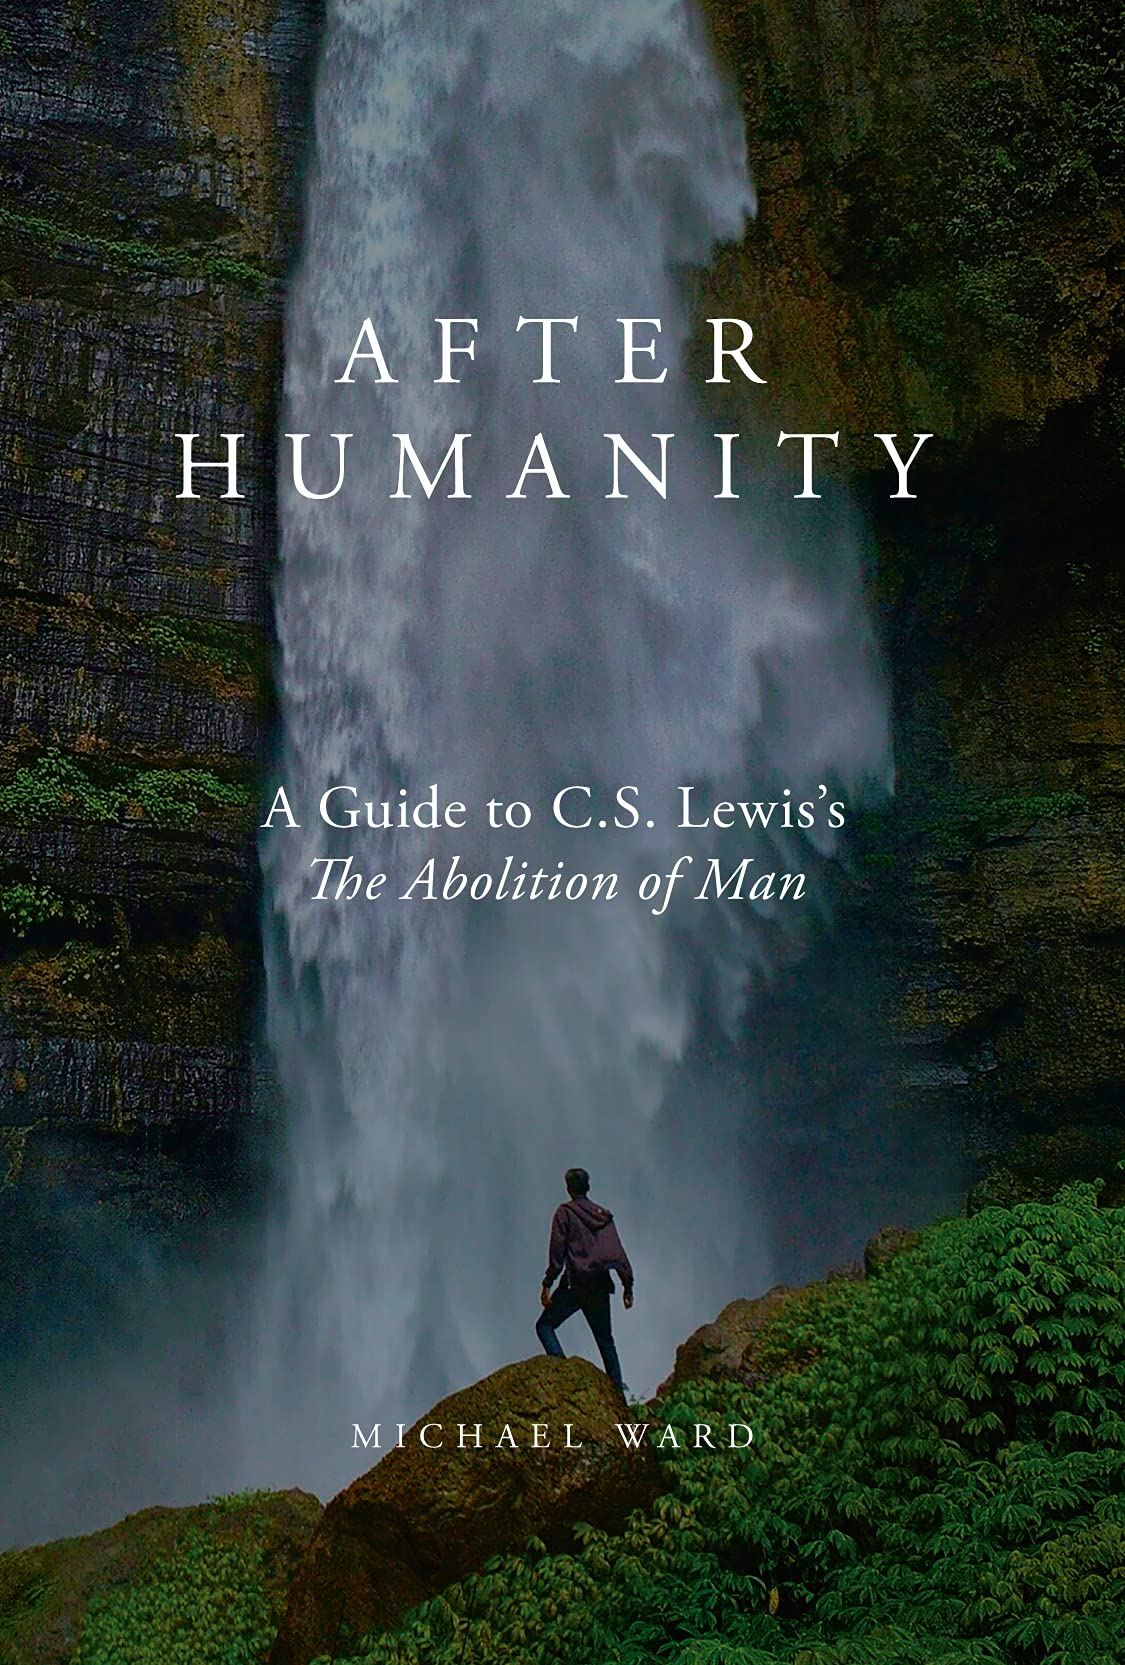 After Humanity (Lewis/Ward - hardcover)